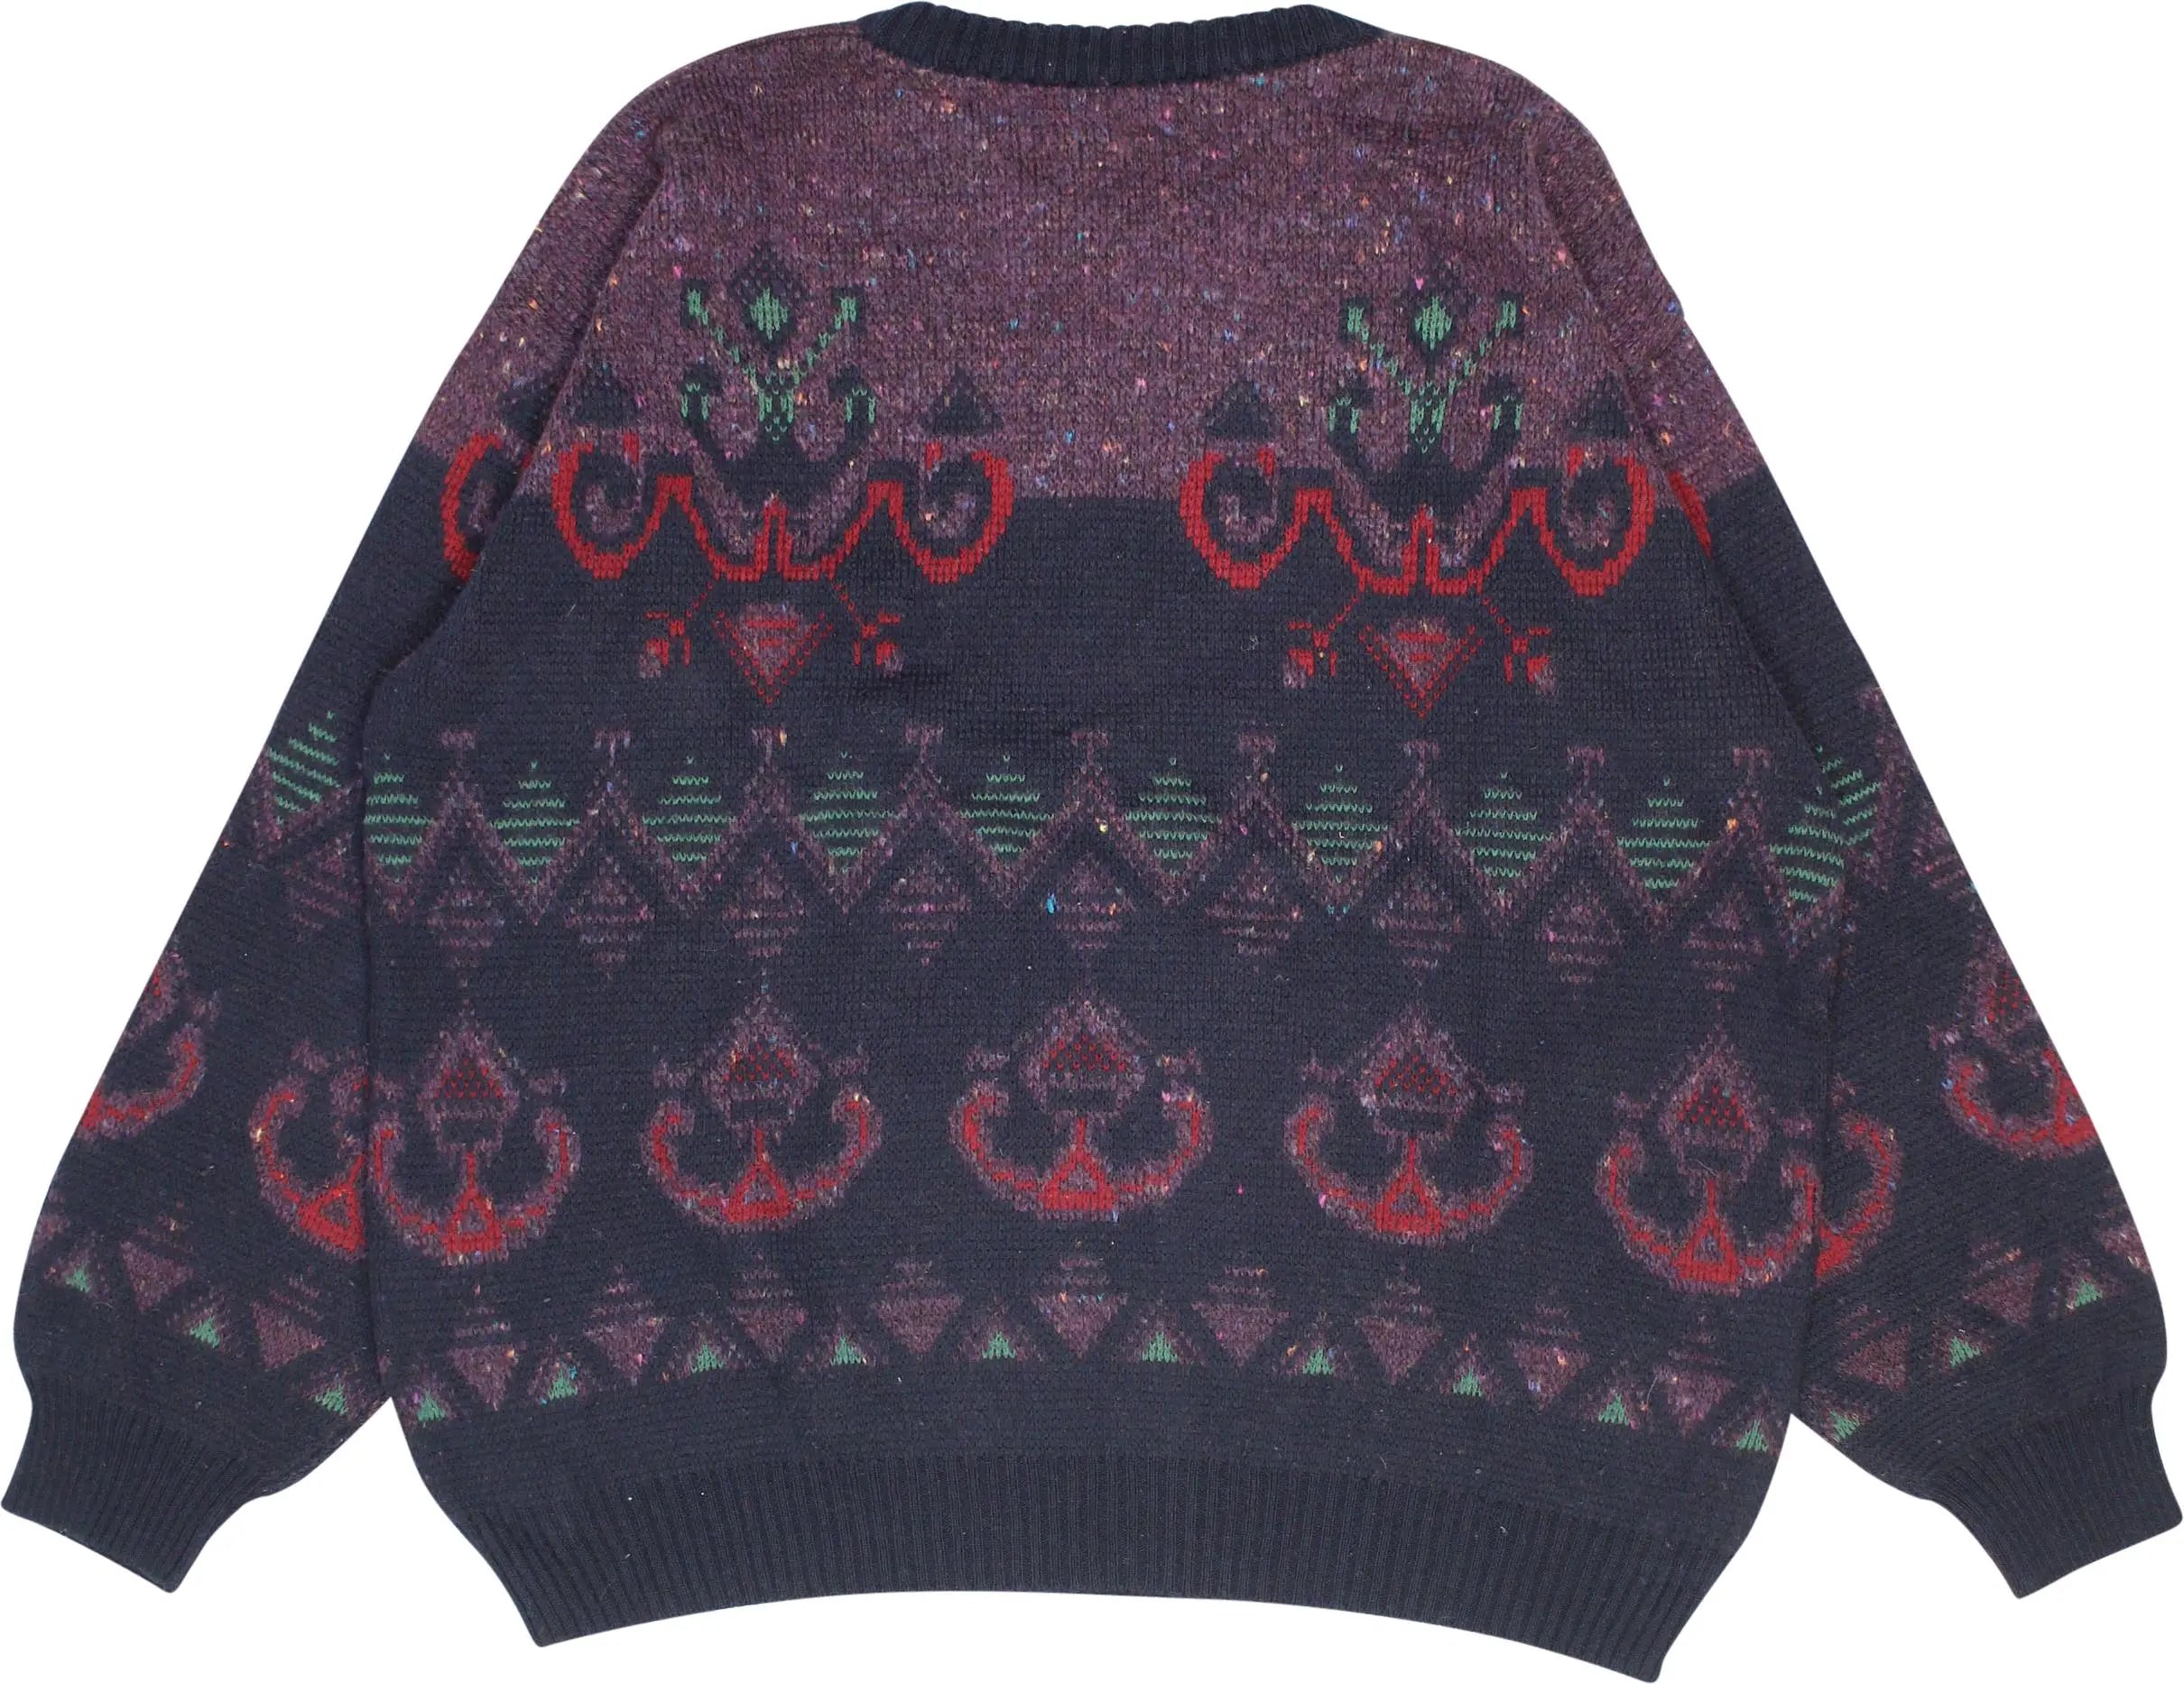 Frank Alexs - 80s Wool Blend Knitted Sweater- ThriftTale.com - Vintage and second handclothing